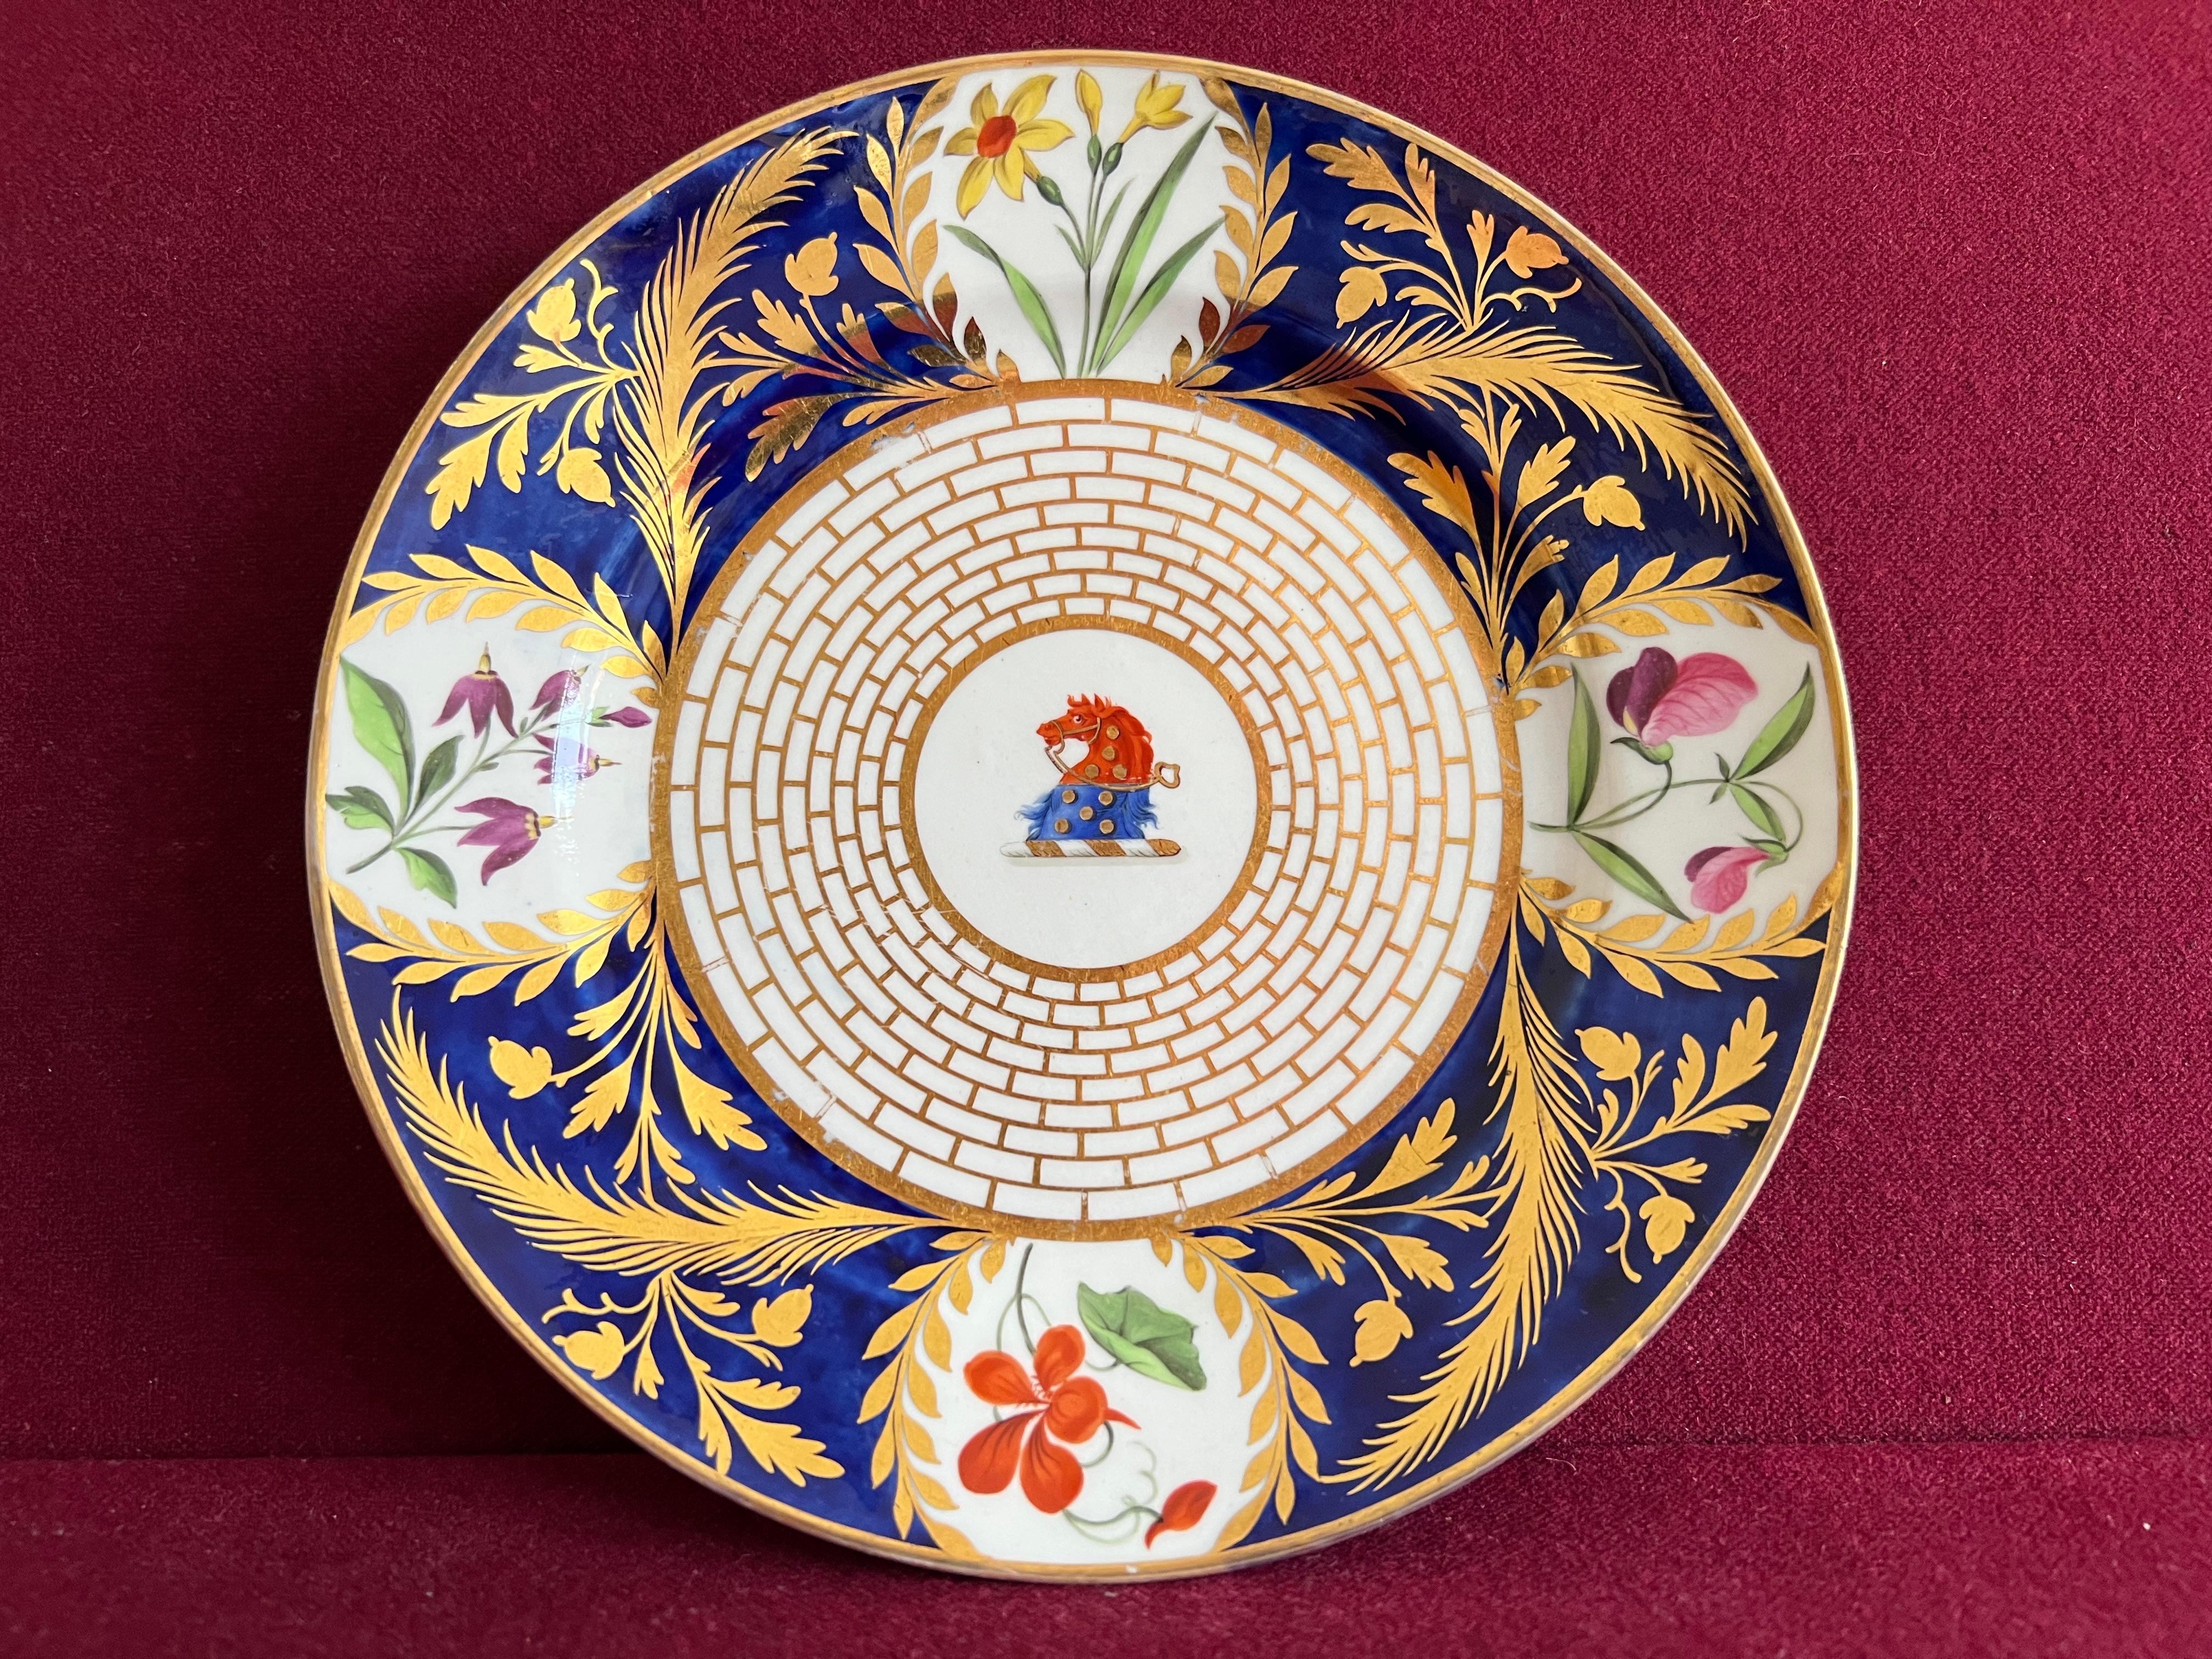 A fine Chamberlain Worcester porcelain dessert plate c.1815. Finely decorated with an armorial crest to the central well of the plate and gilt brickwork. The flange of the plate decorated with a cobalt blue ground and roundels containing flower